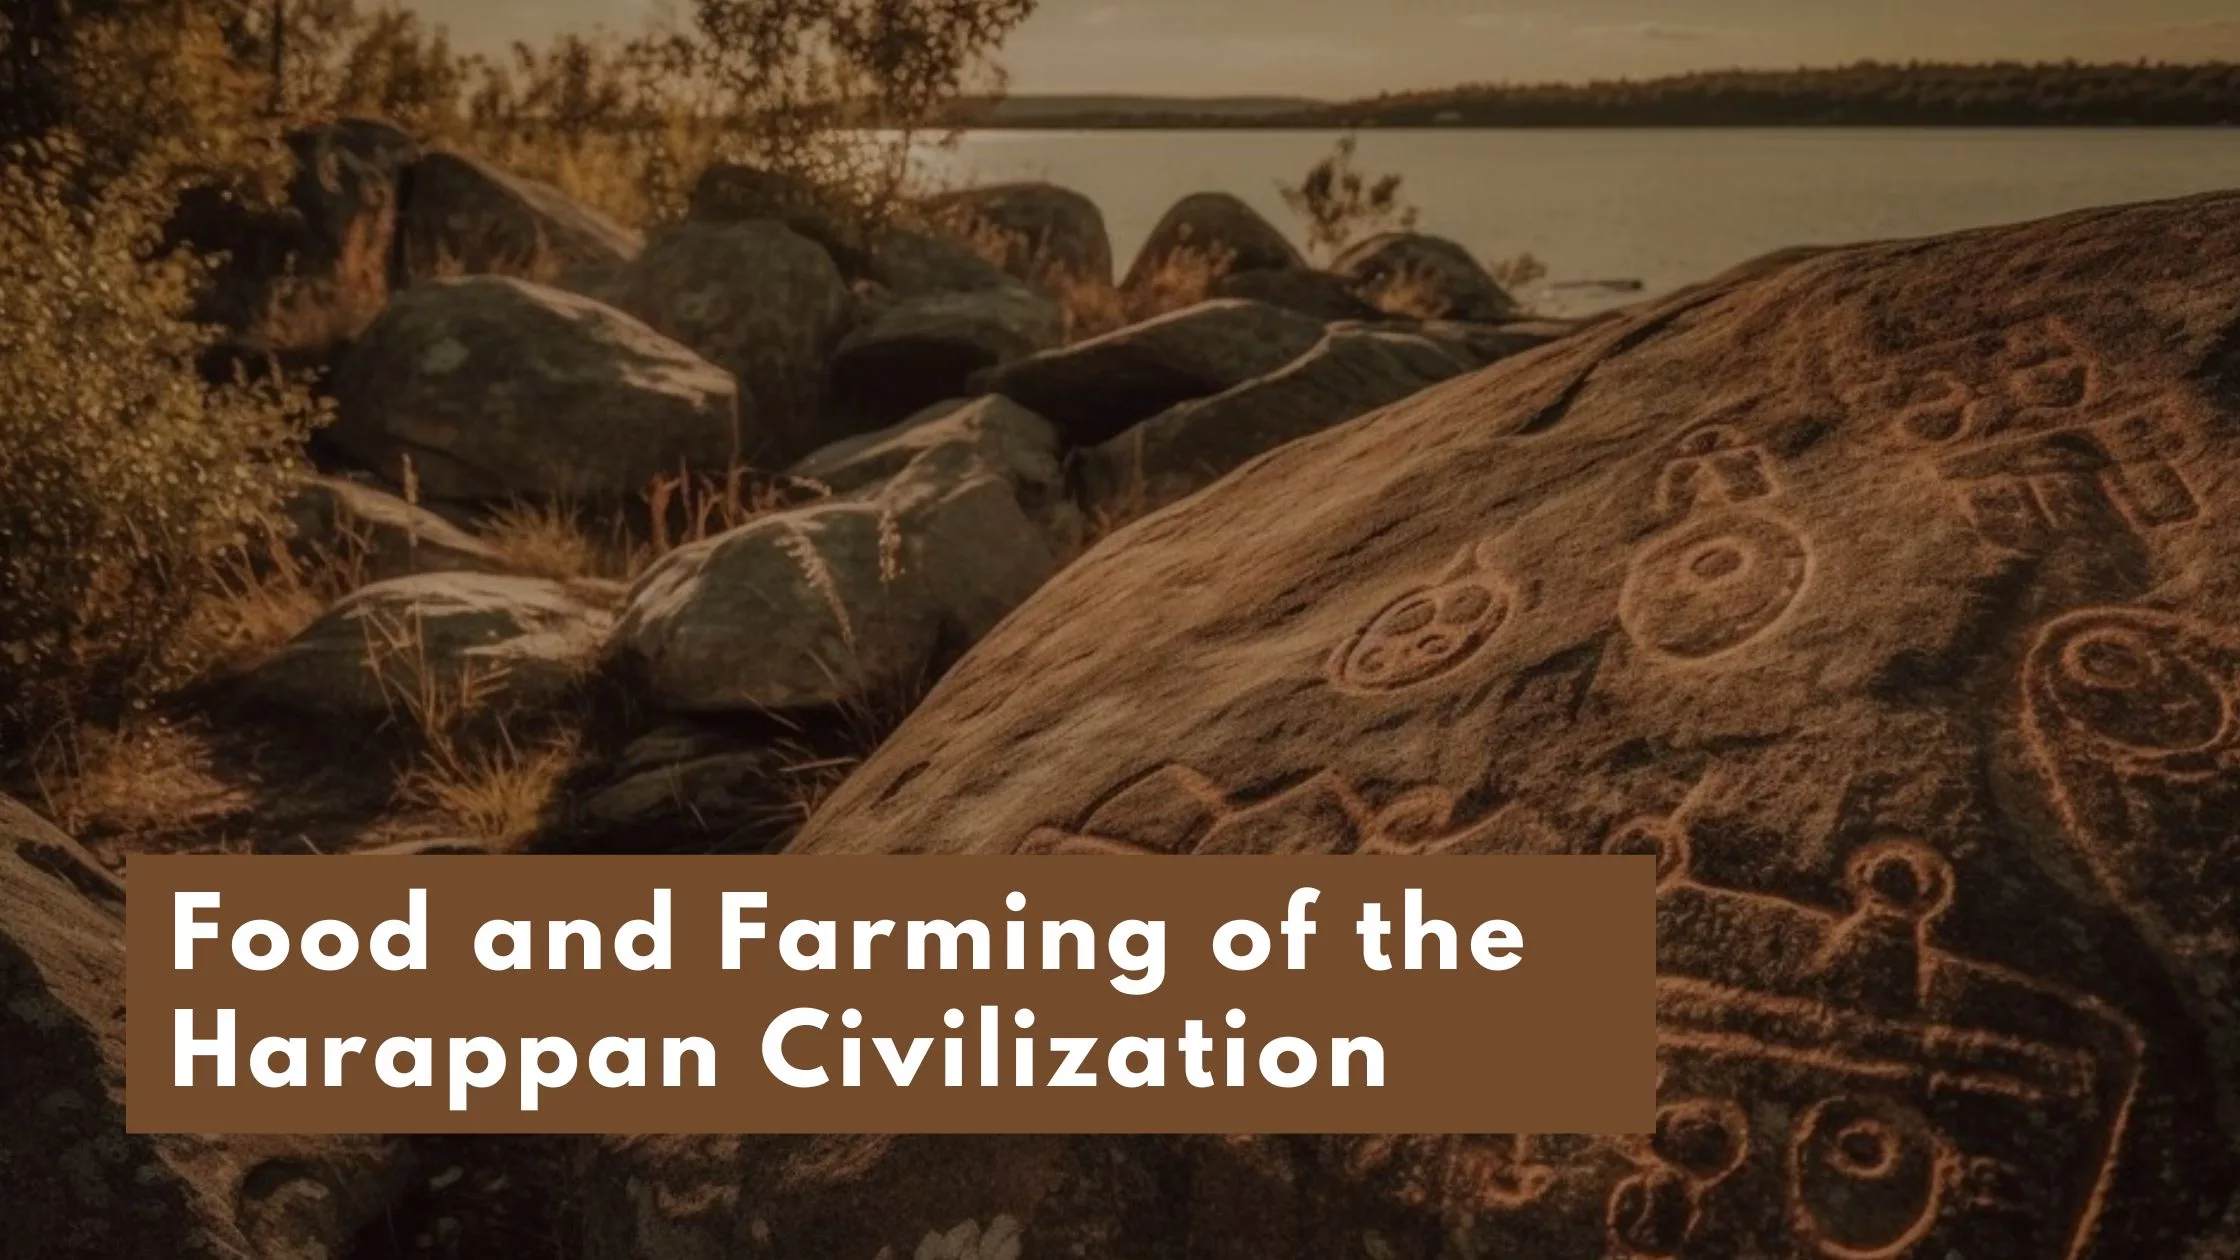 Food and Farming of the Harappan Civilization